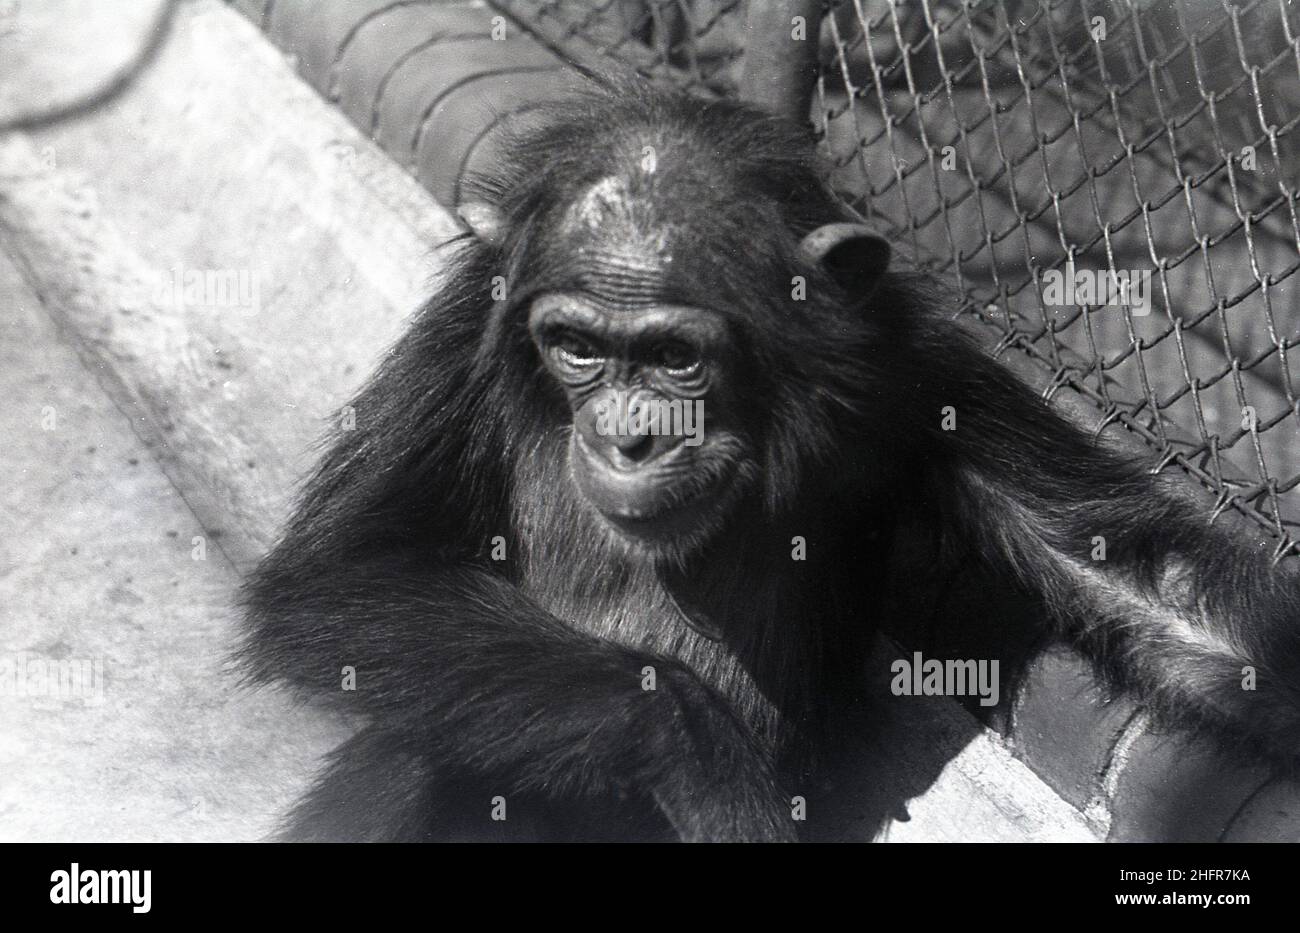 1950s, historical, in his enclosure at a zoo, by a fence, a small monkey, seen from above, England, UK. Stock Photo